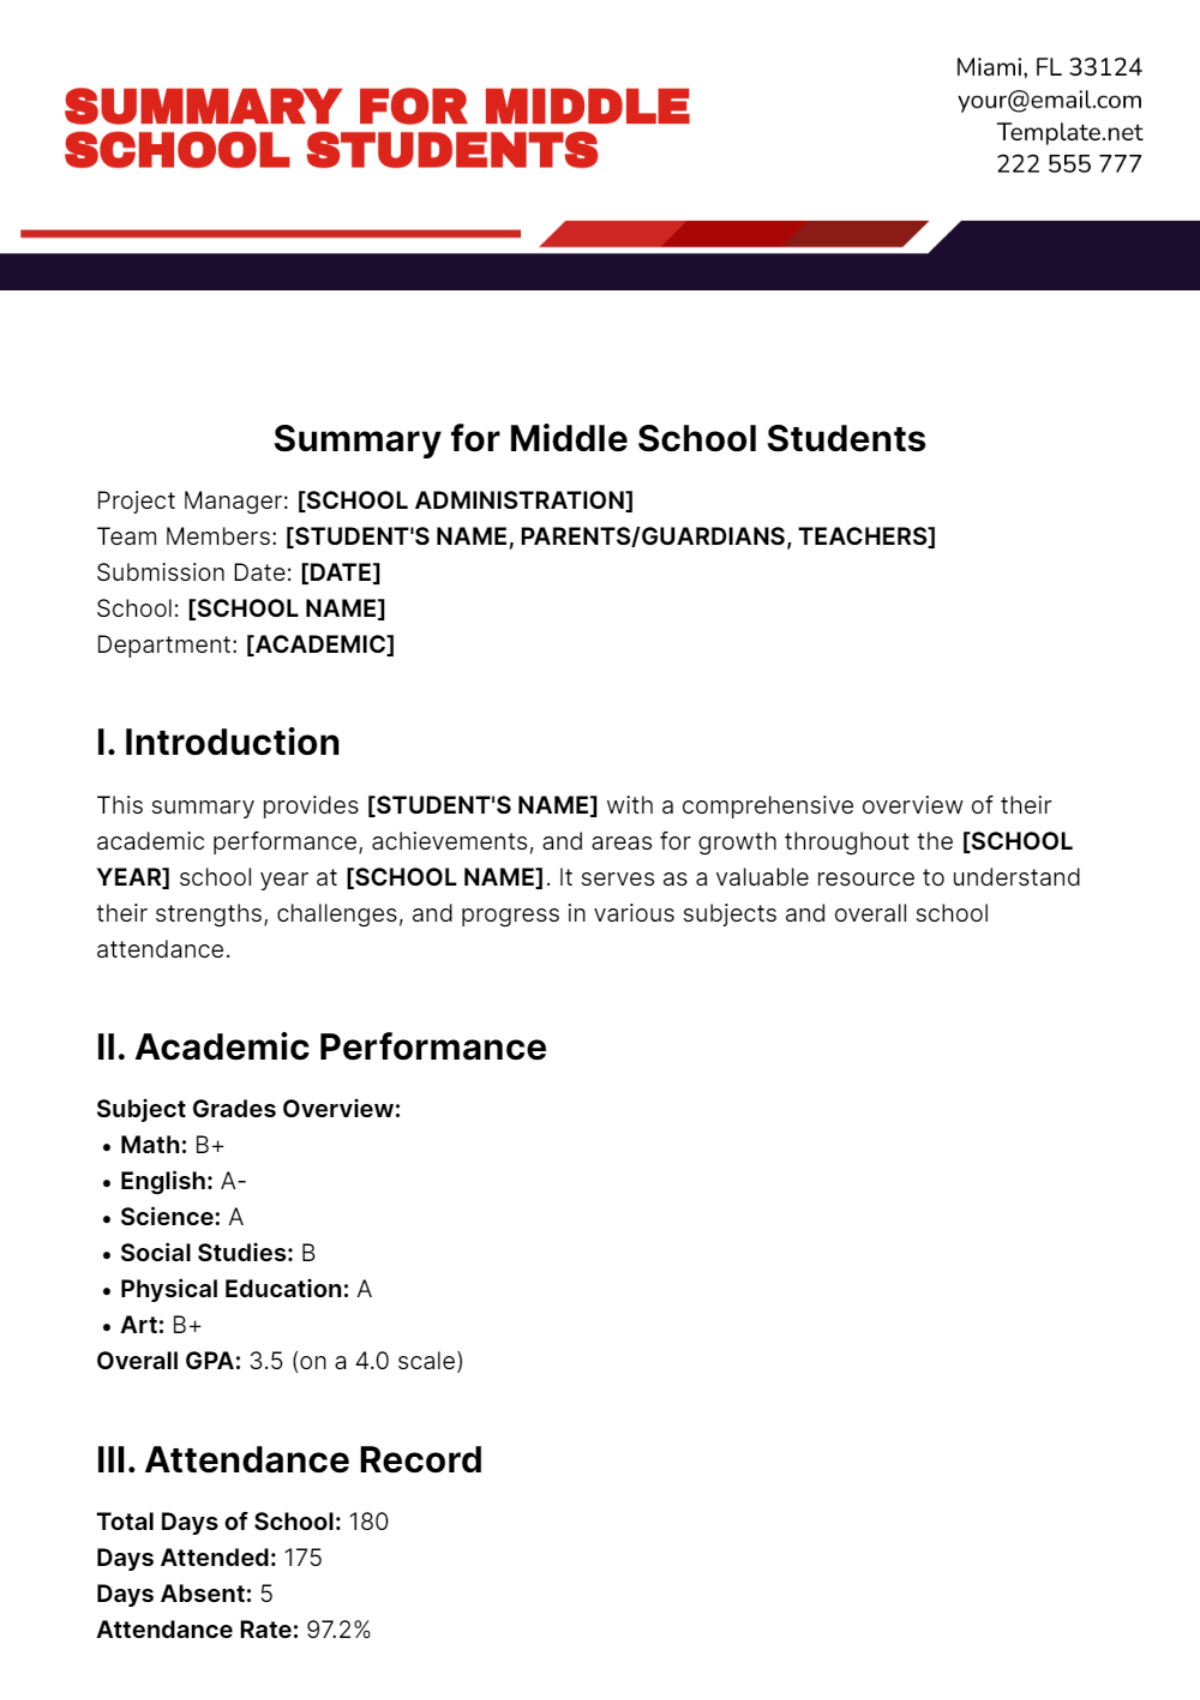 Summary for Middle School Students Template